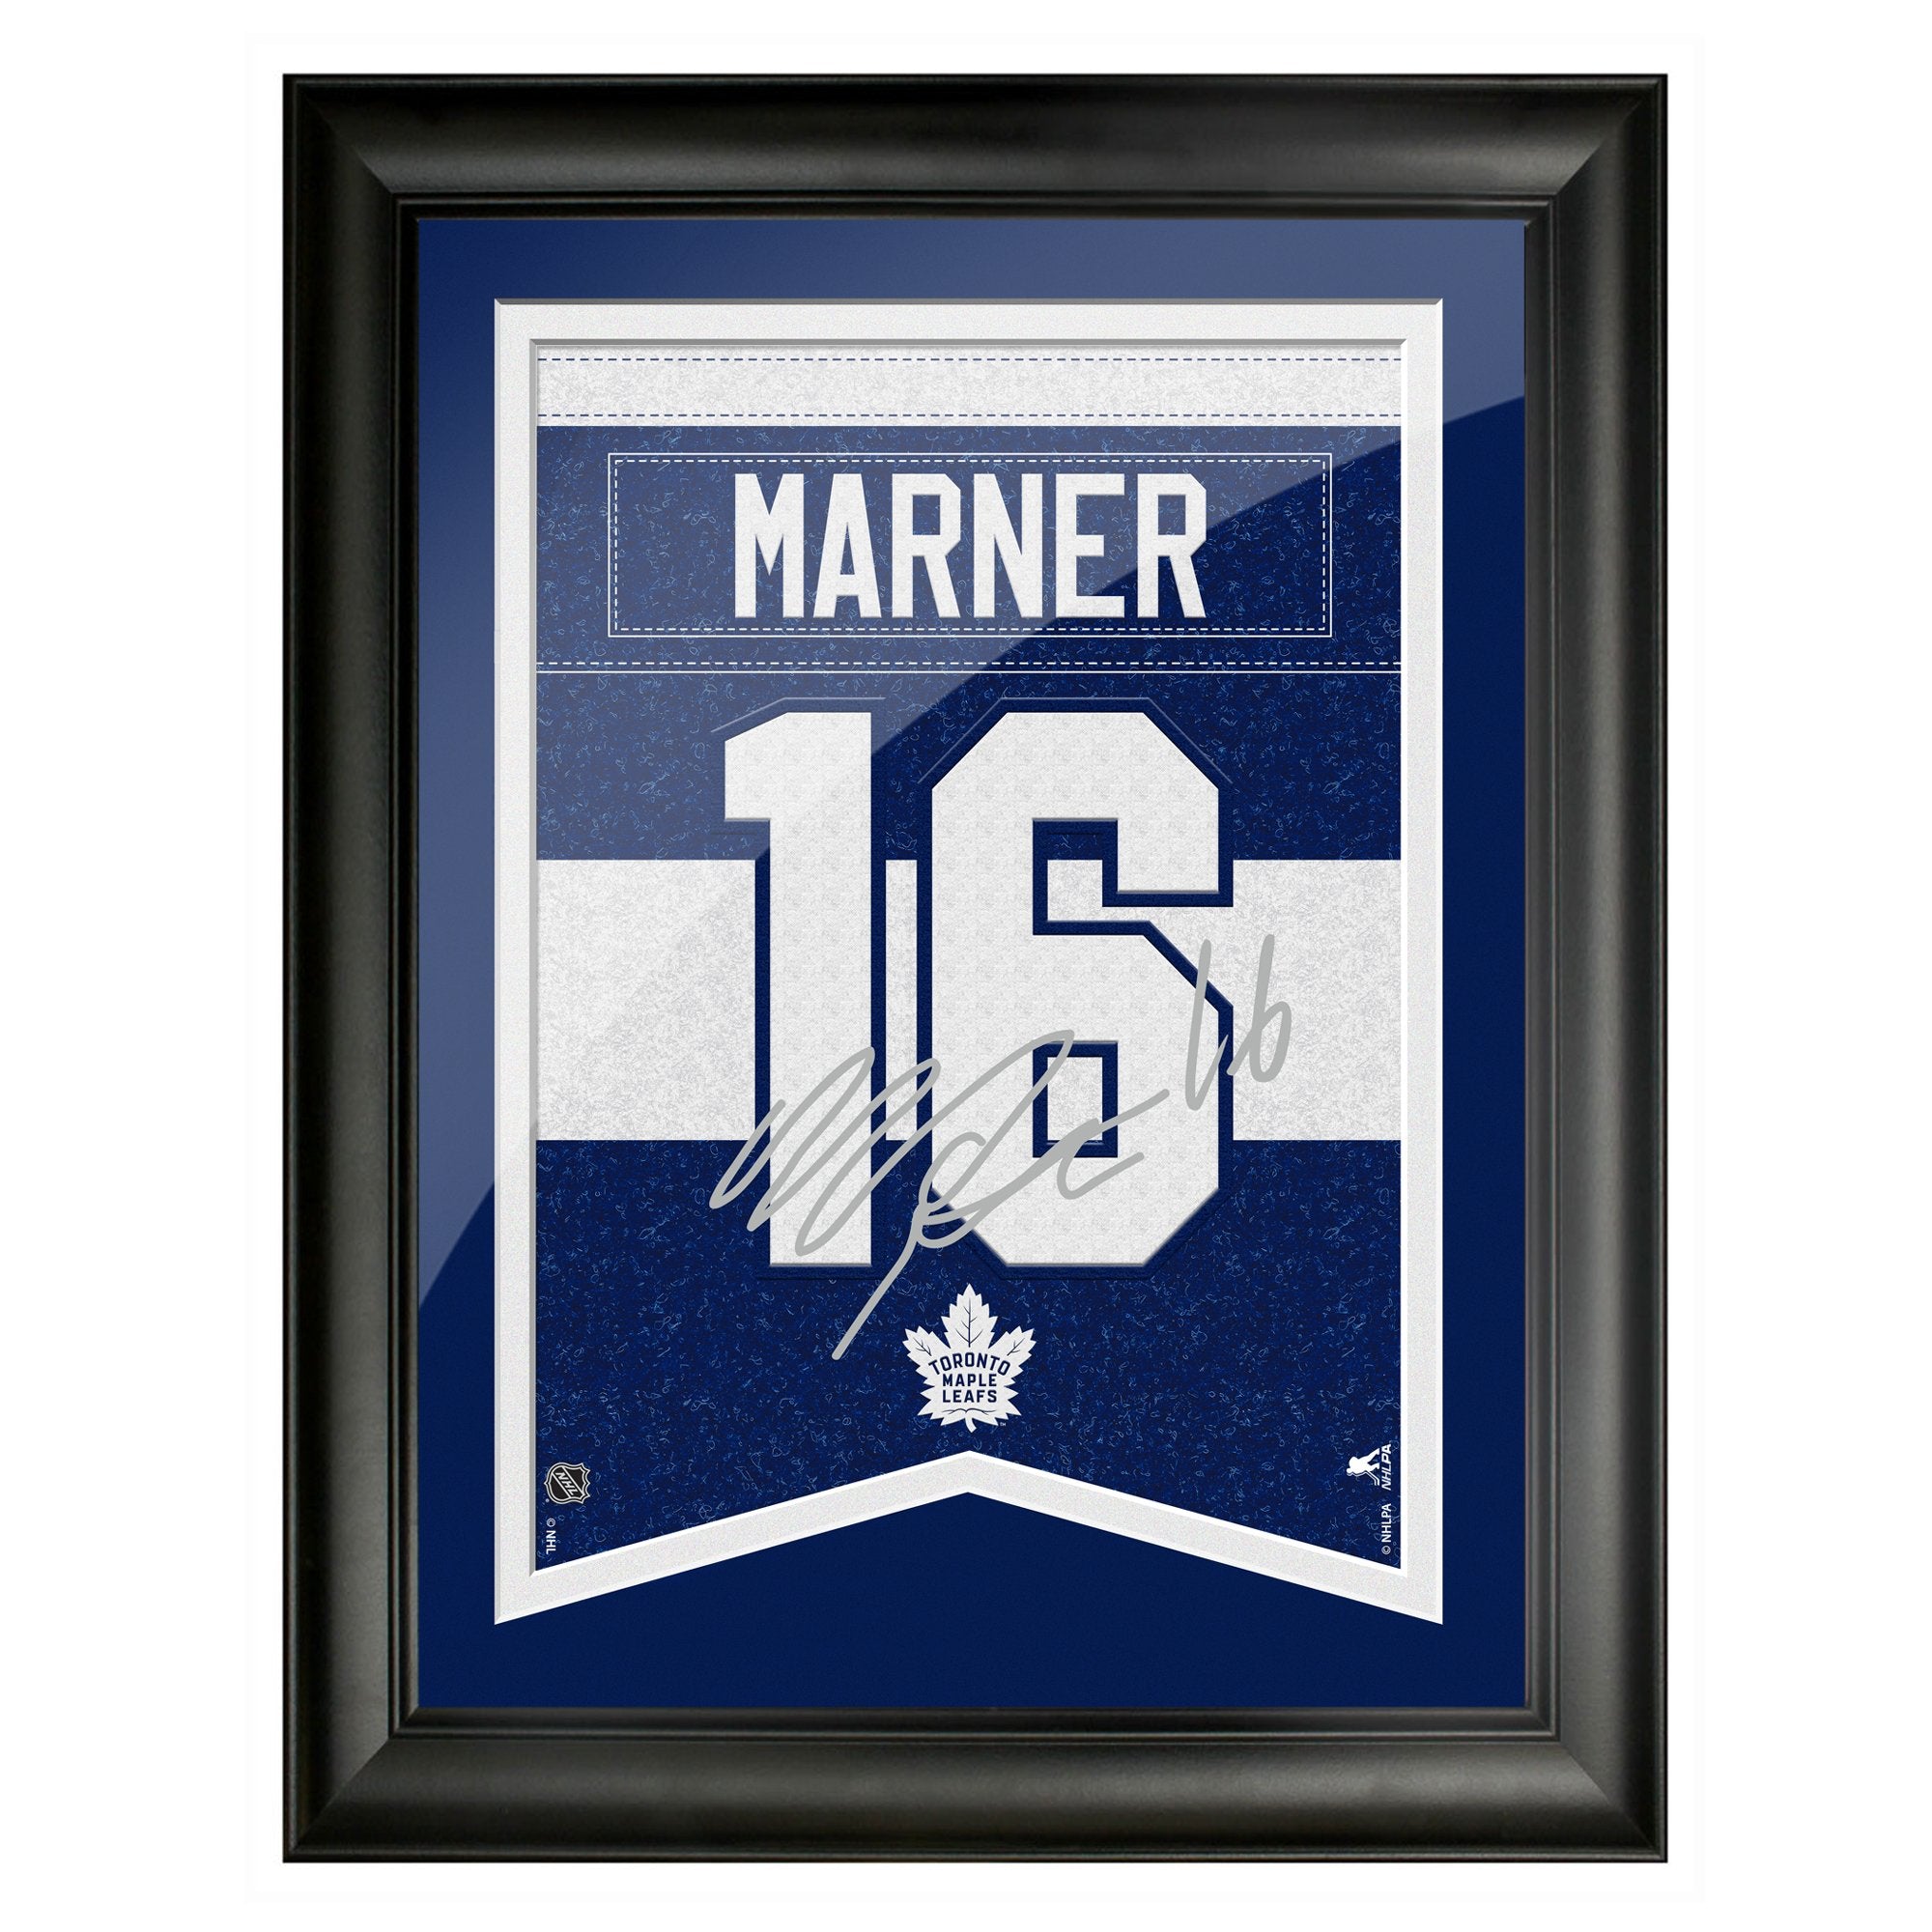 Toronto Maple Leafs Mitch Marner Frame - 12" x 16" Number with Replica Autograph - Hockey Hall of Fame